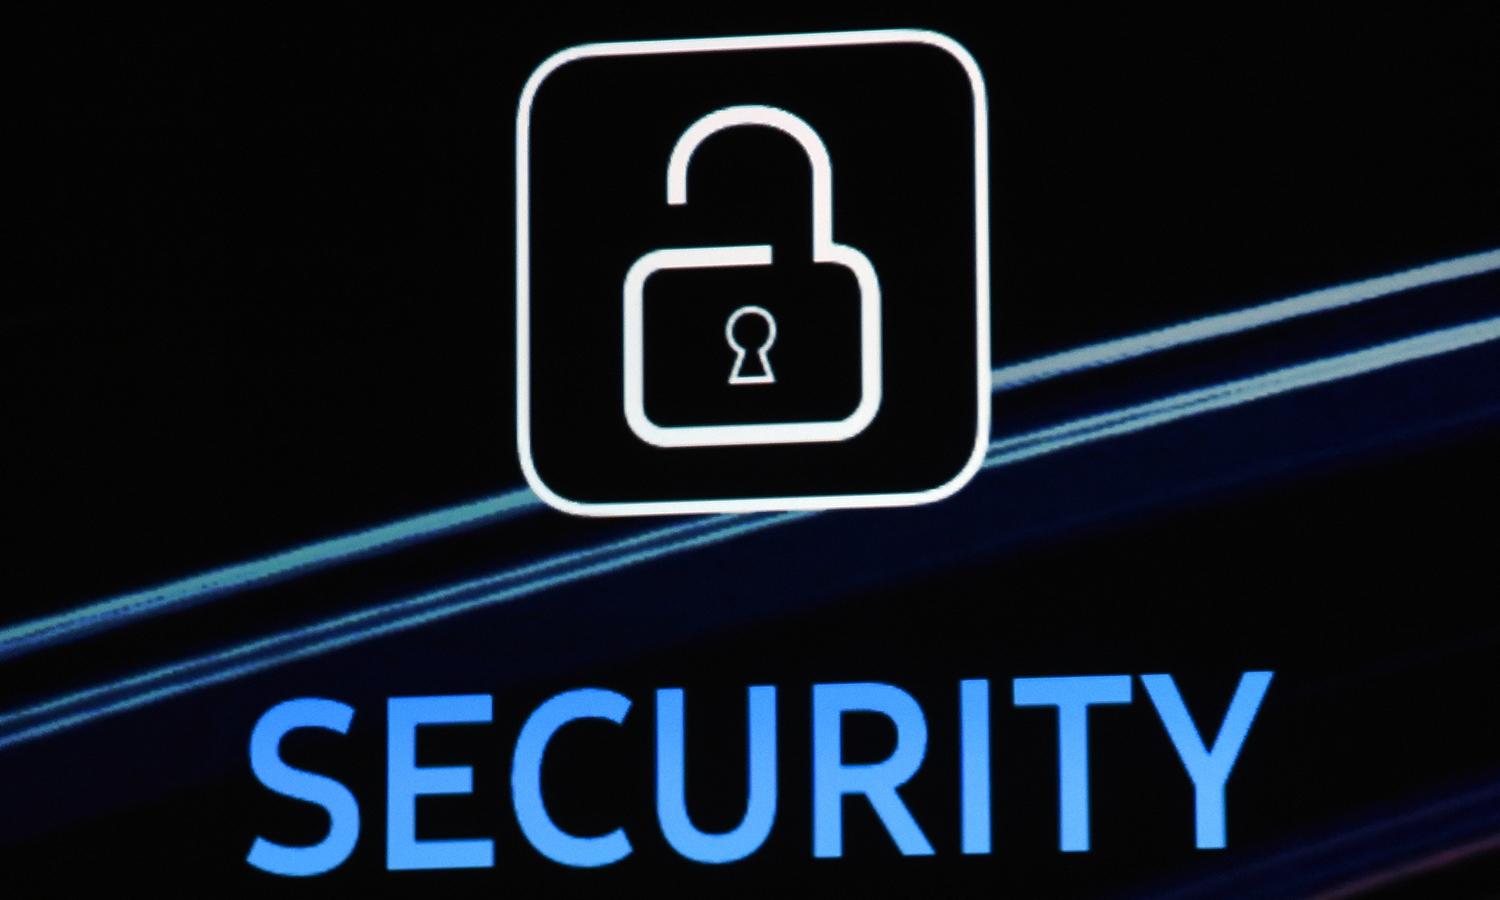 A security logo is shown on screen during a keynote address.